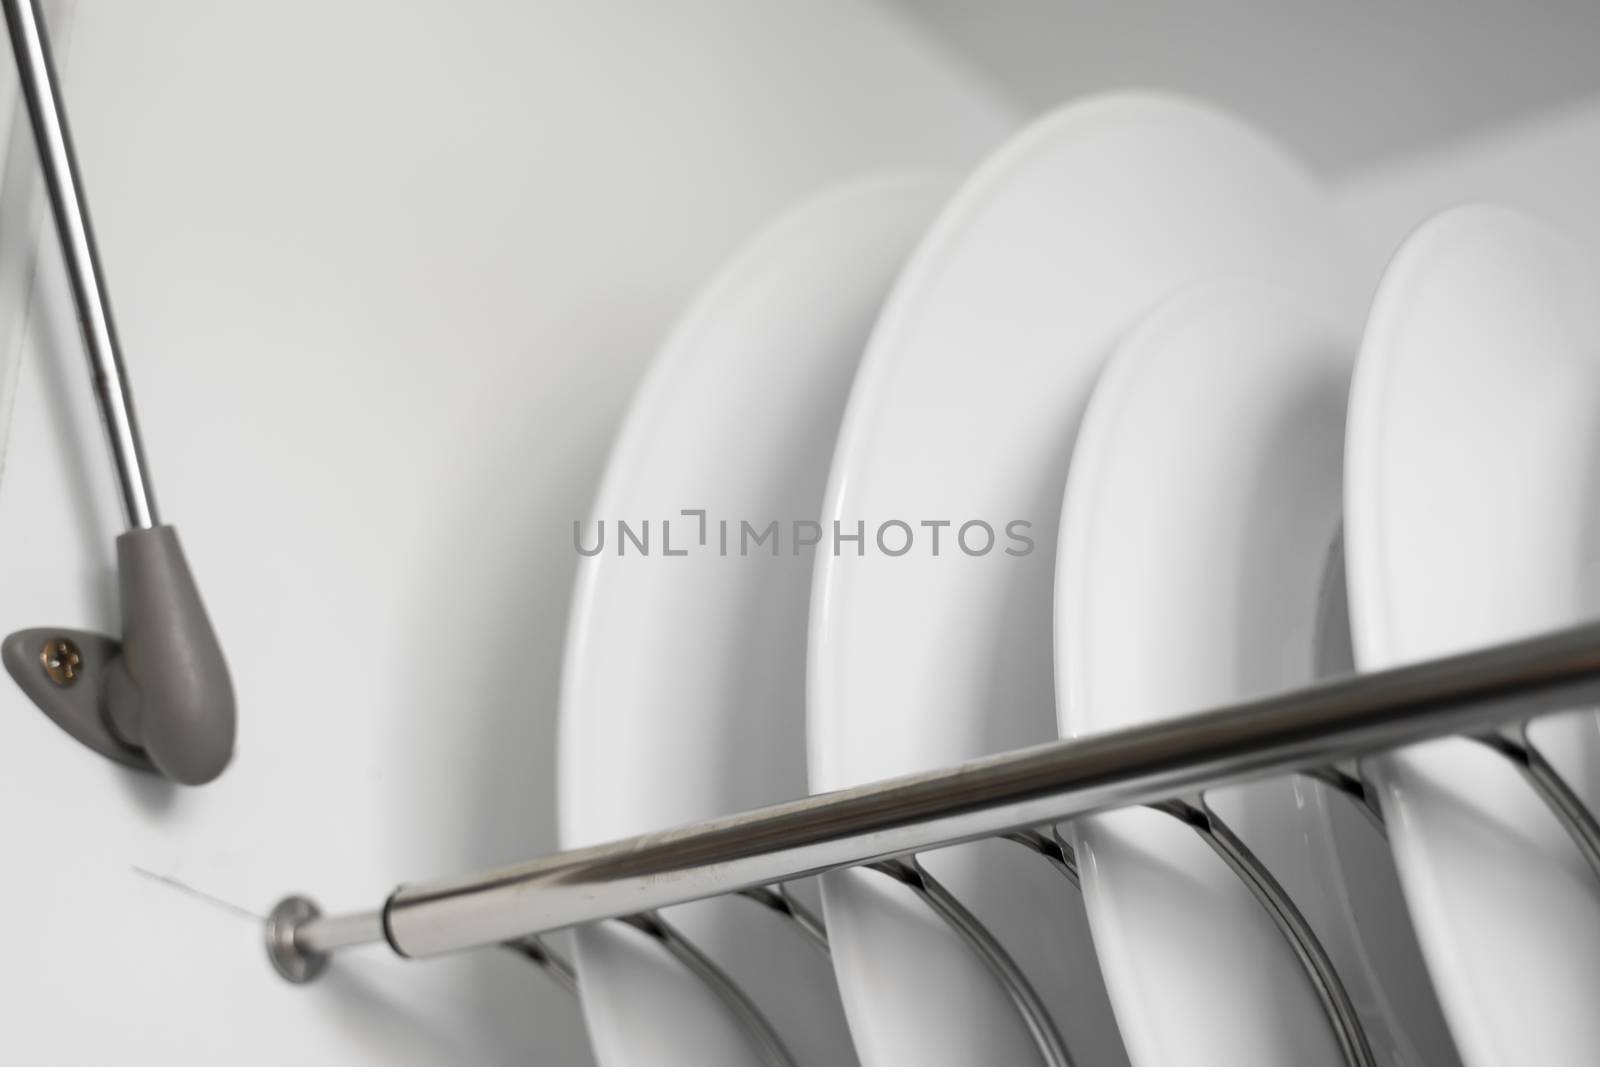 Dish drying metal rack with big nice white clean plates. Traditional comfortable kitchen. Open white dish draining closet with wet dishes of glass and ceramic, plates, bowls drying inside on rack. by vovsht